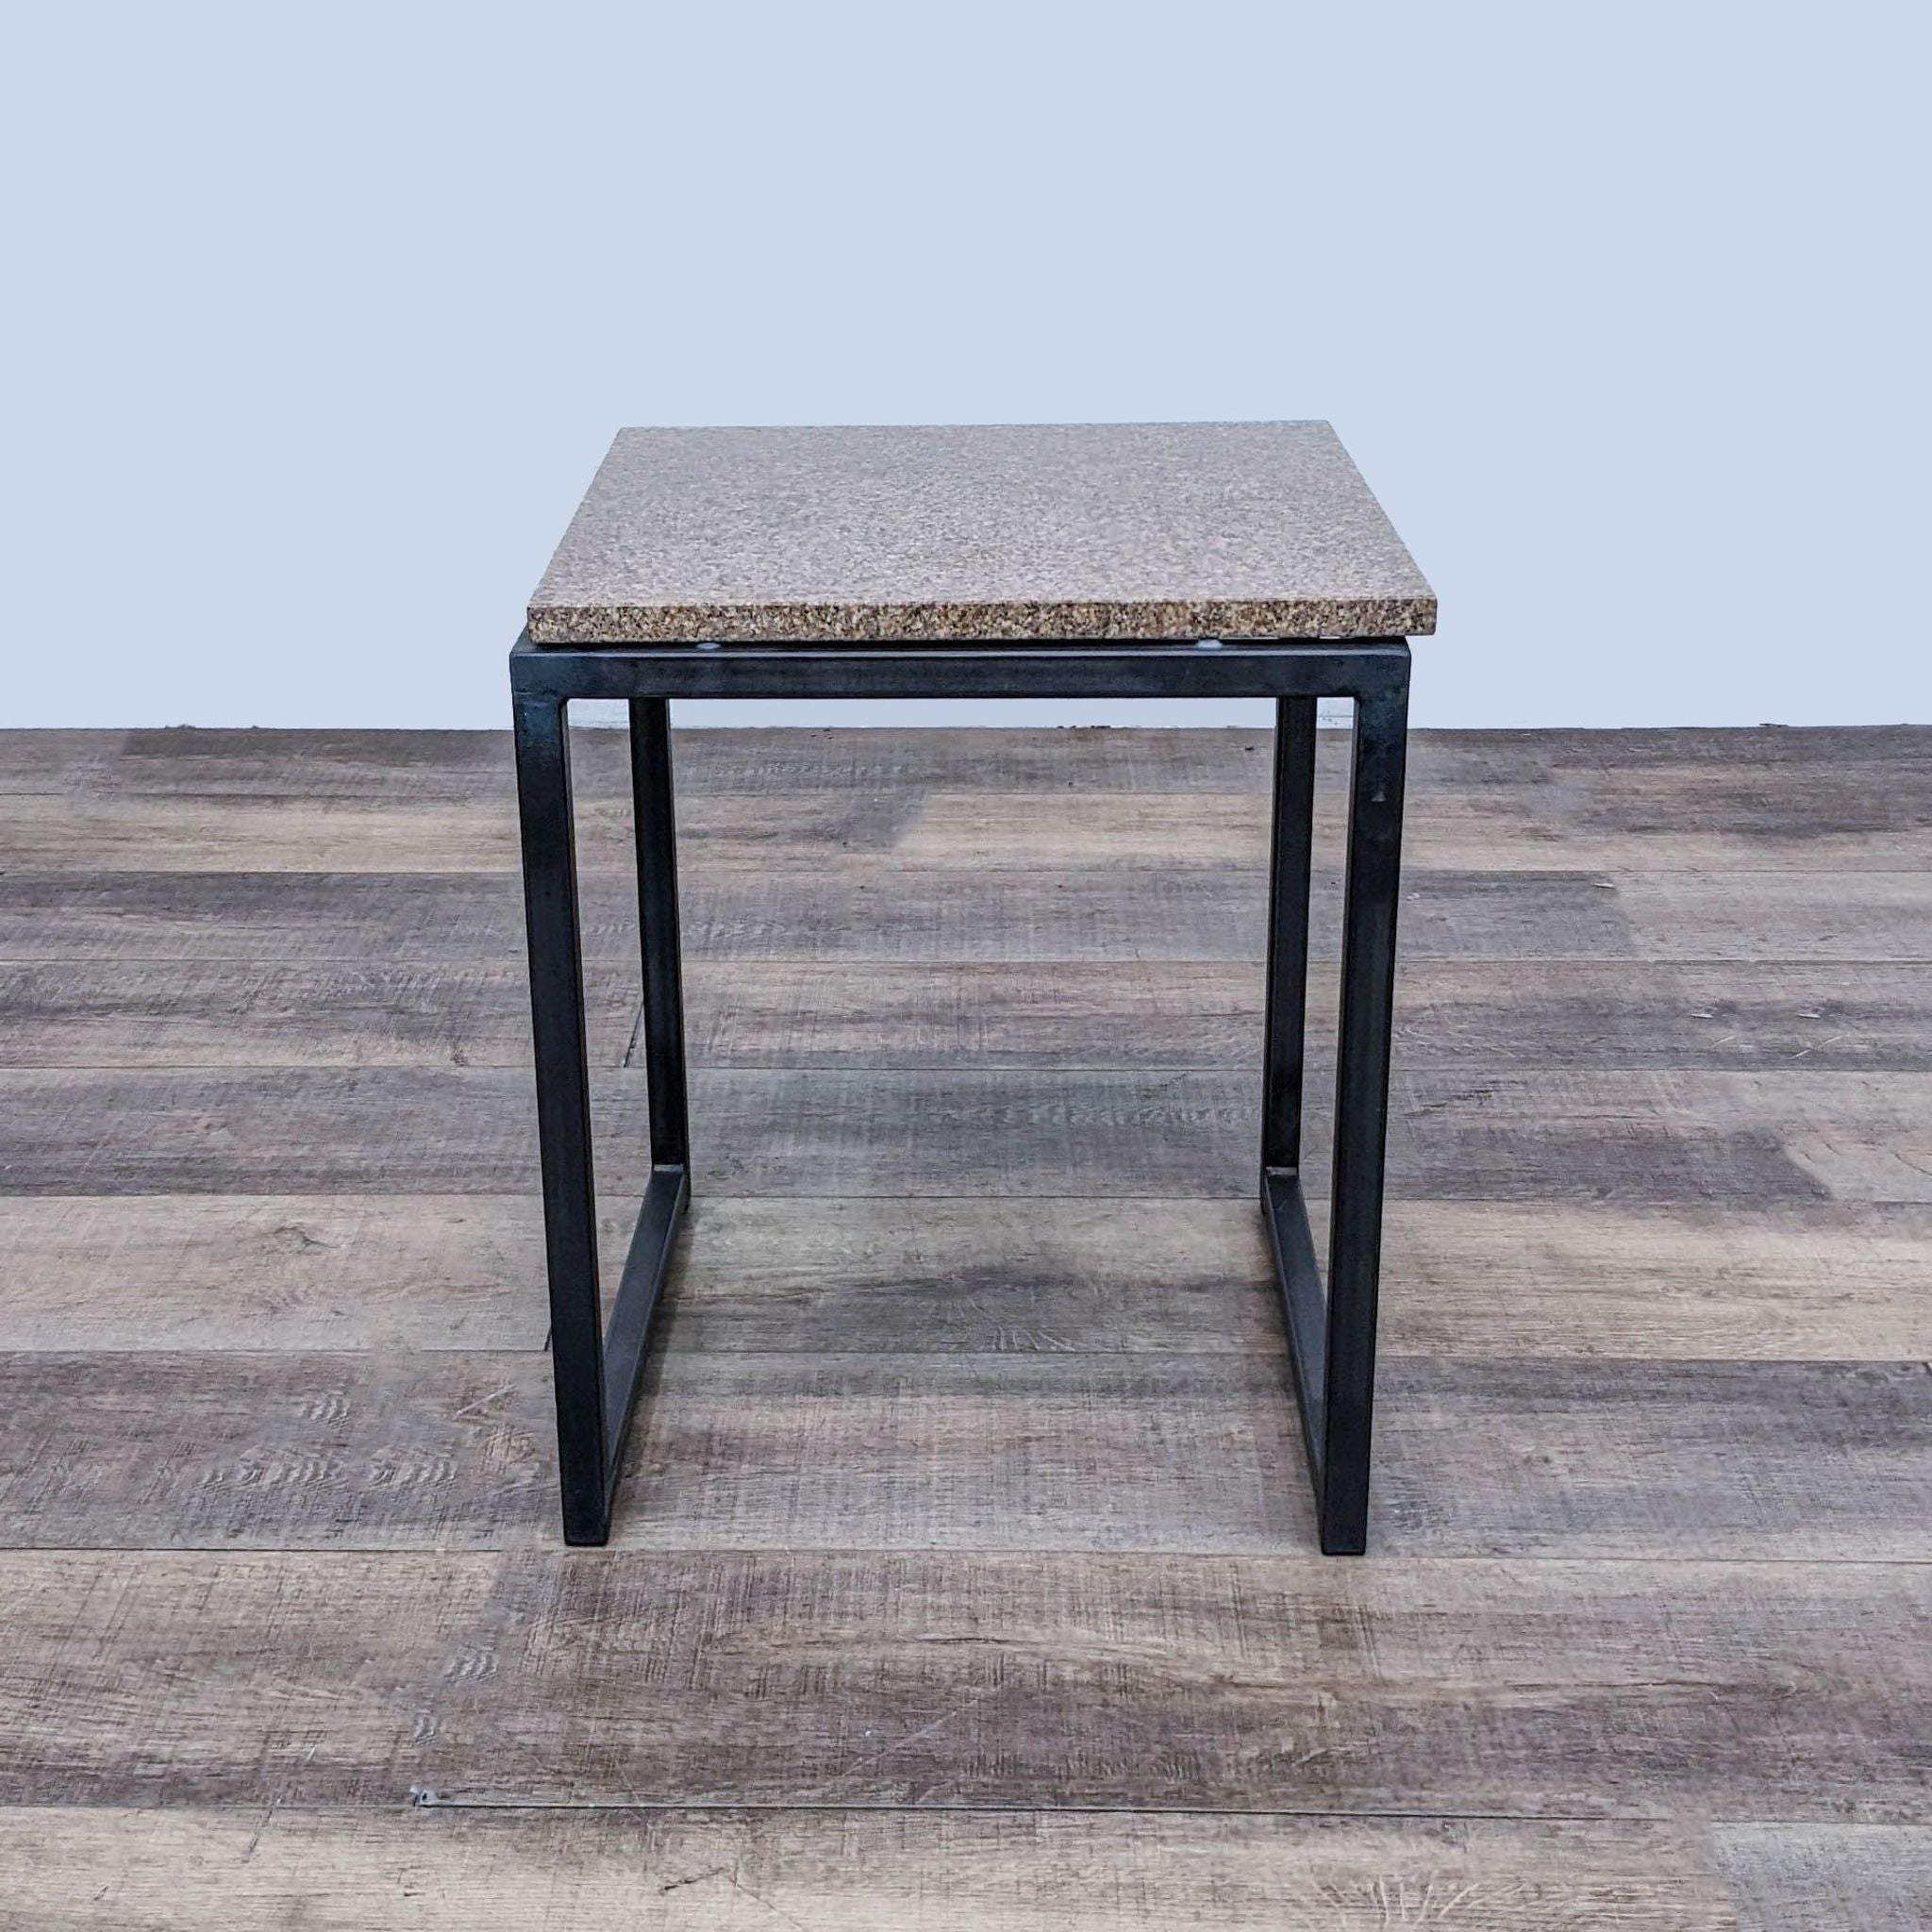 Room & Board side table with metal base and speckled top, shown in front view on a wooden floor.